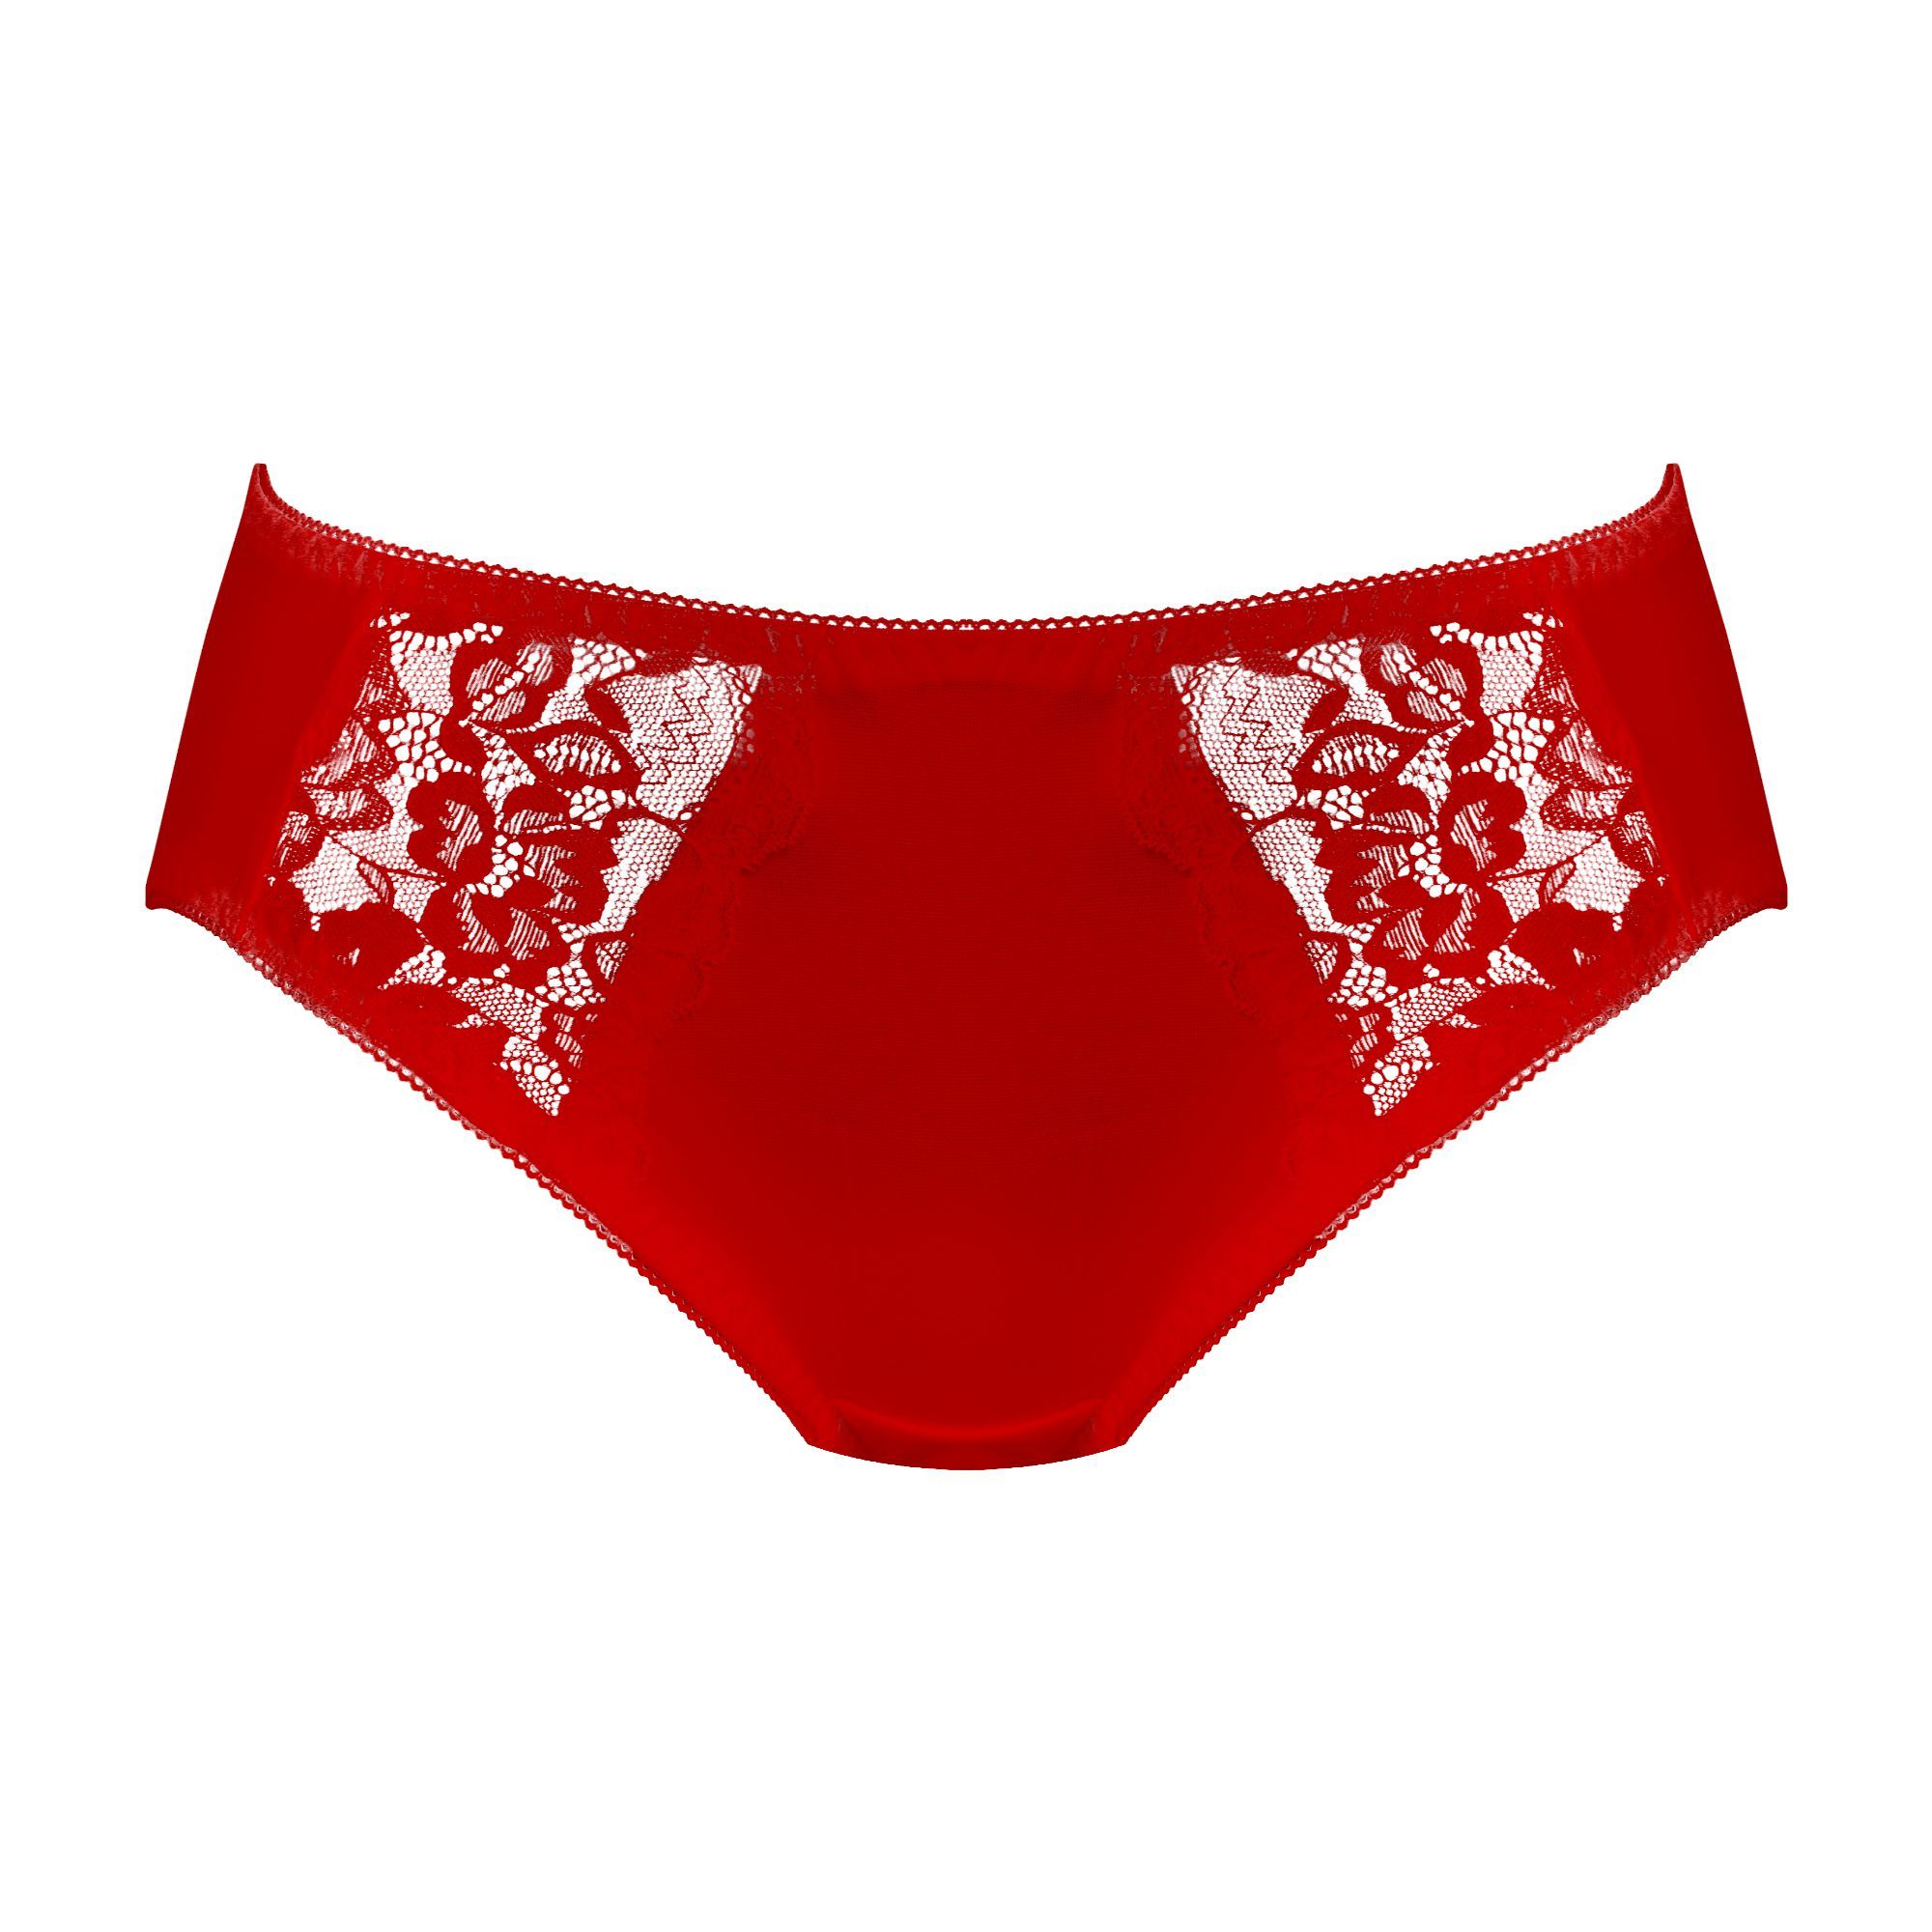 Purchase IFG Blossom 003 Brief Panty, Red Online at Best Price in